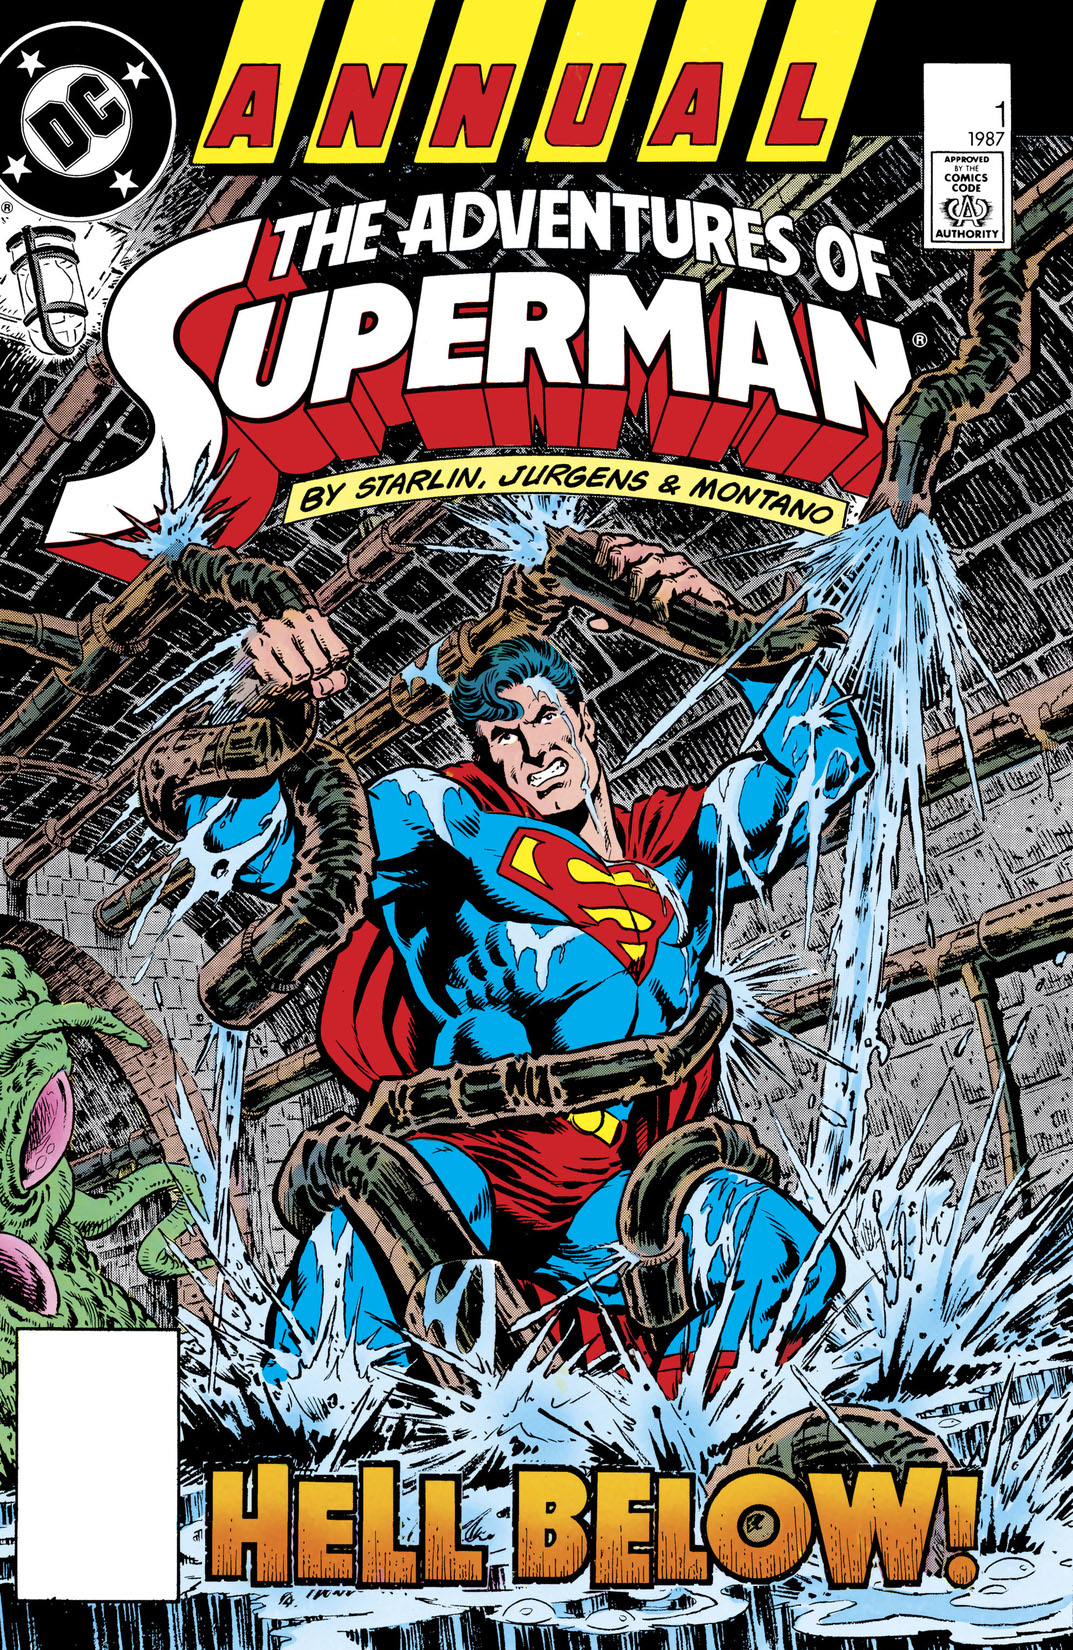 Adventures of Superman Annual (1987-) #1 preview images